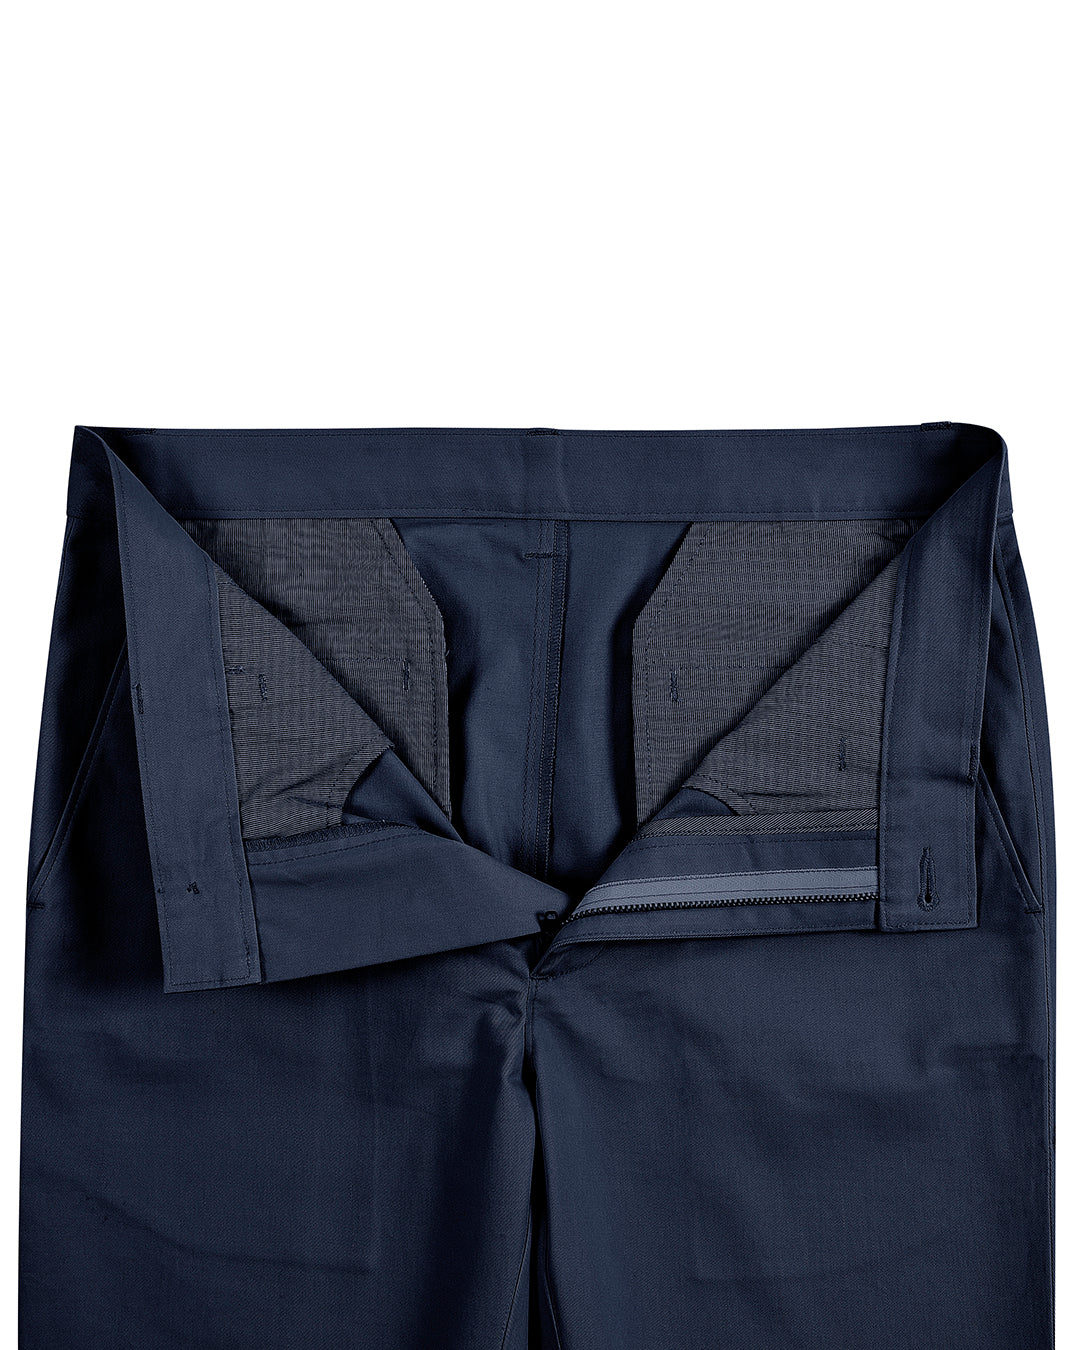 Front open view of custom Genoa Chino pants for men by Luxire in midnight blue